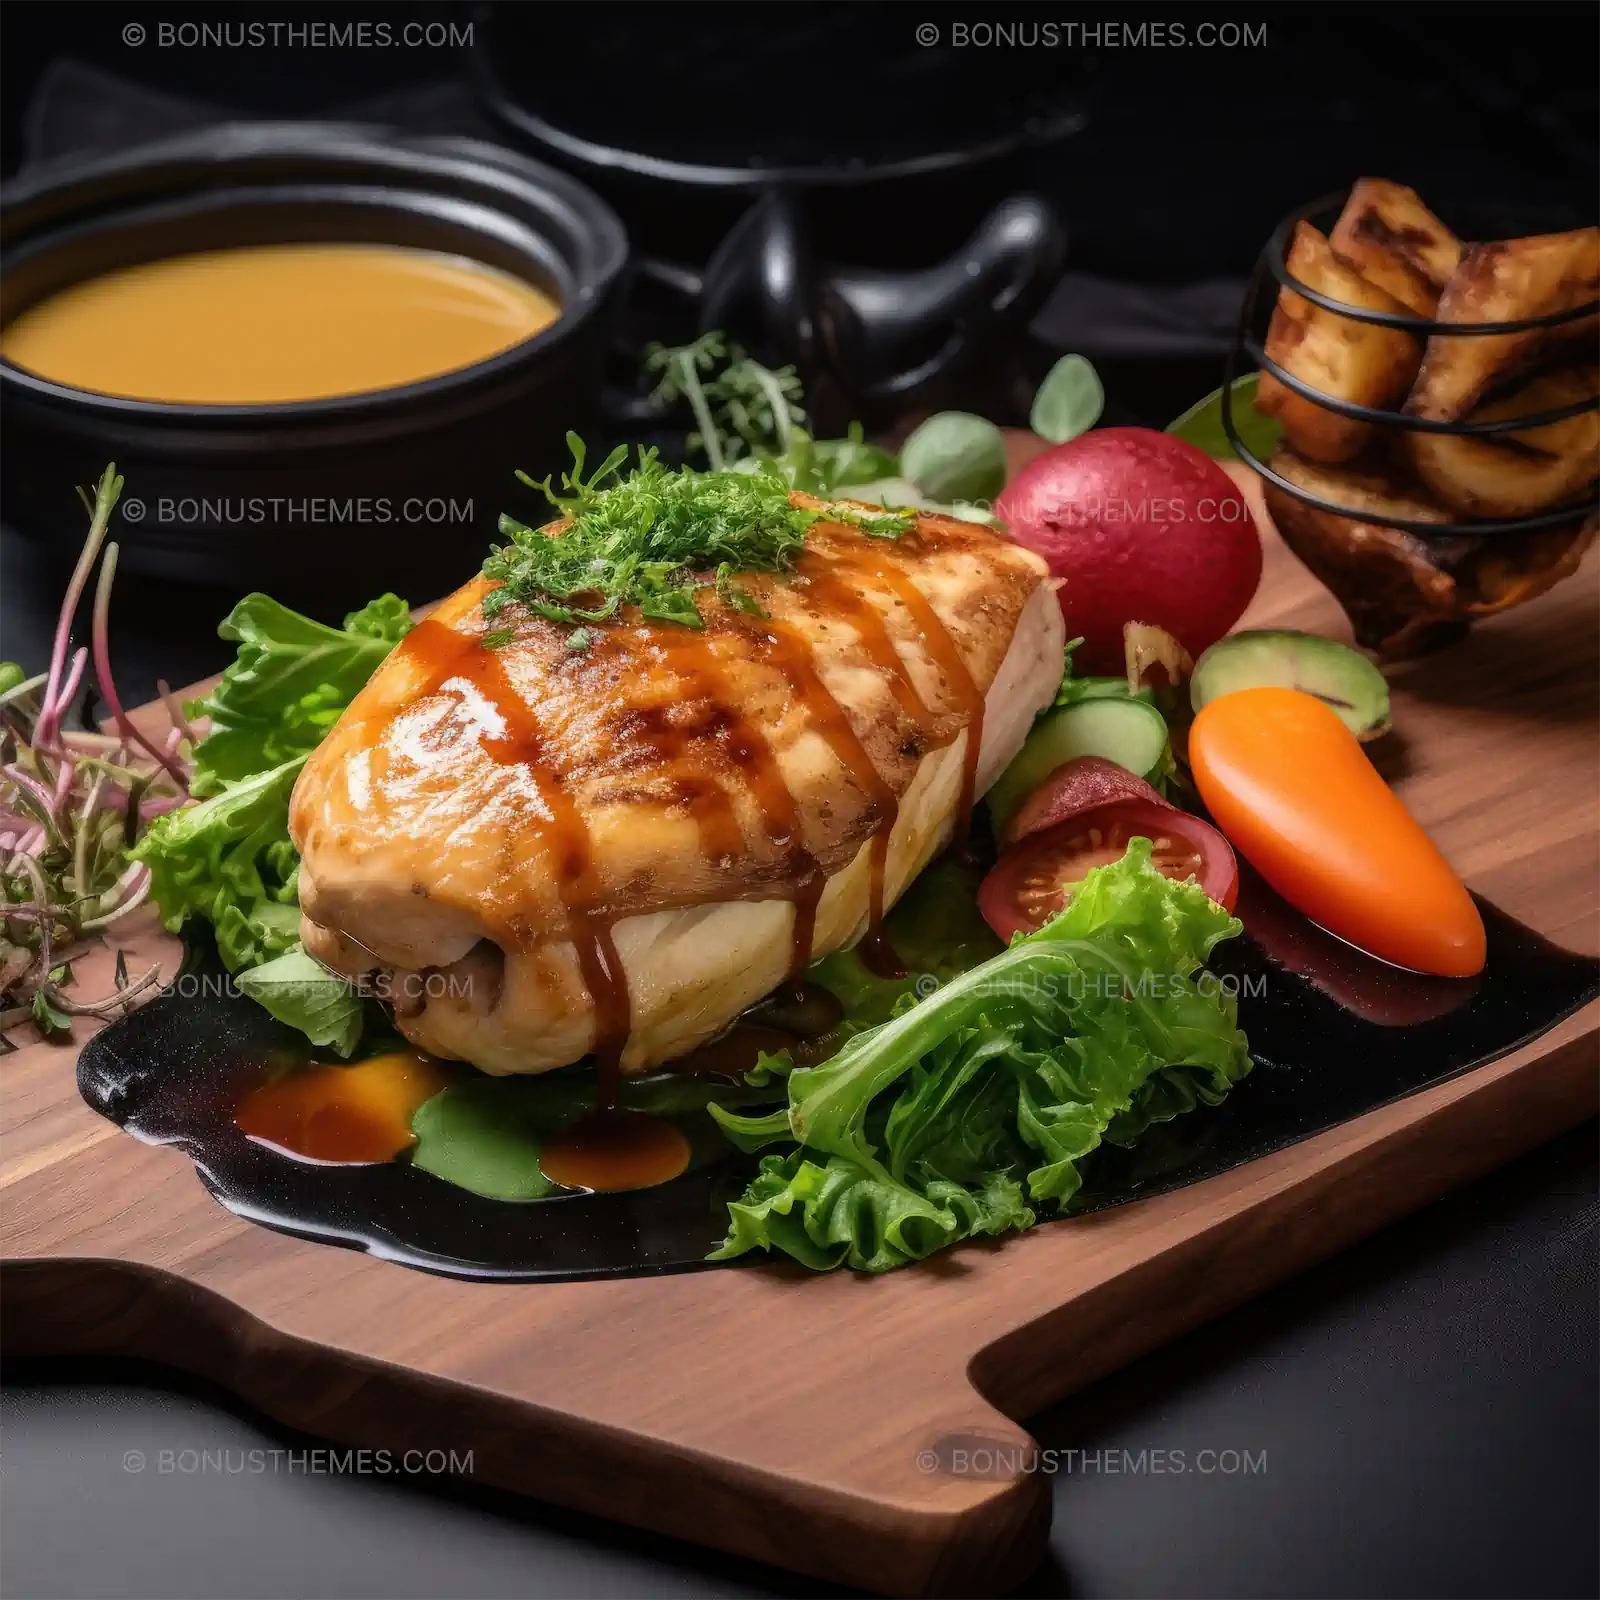 Baked chicken breast on wood with vegetables